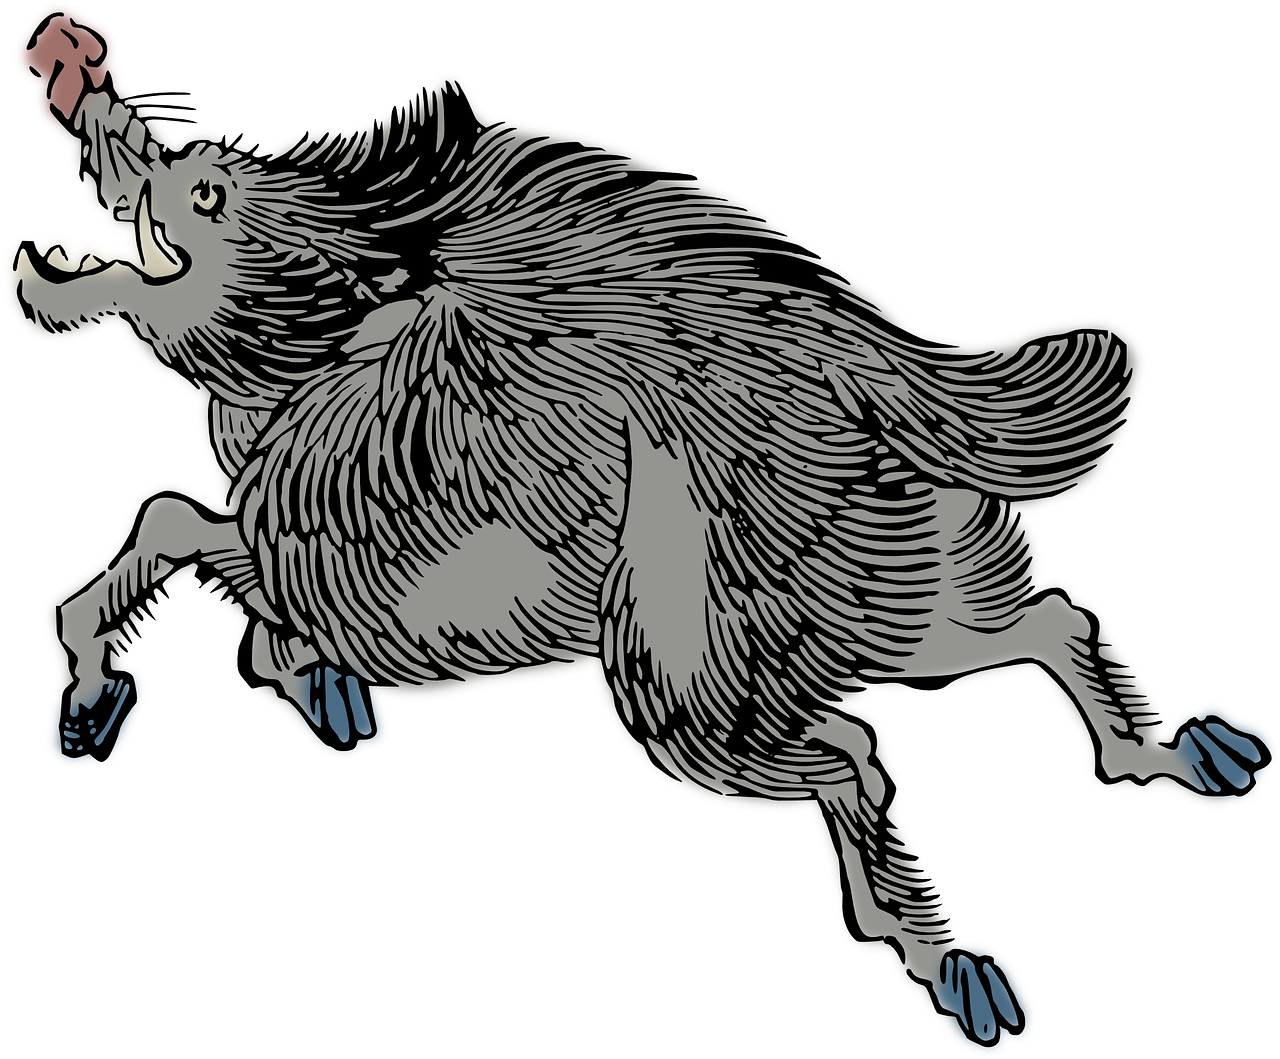 Galloping Wild Boar Illustration PNG